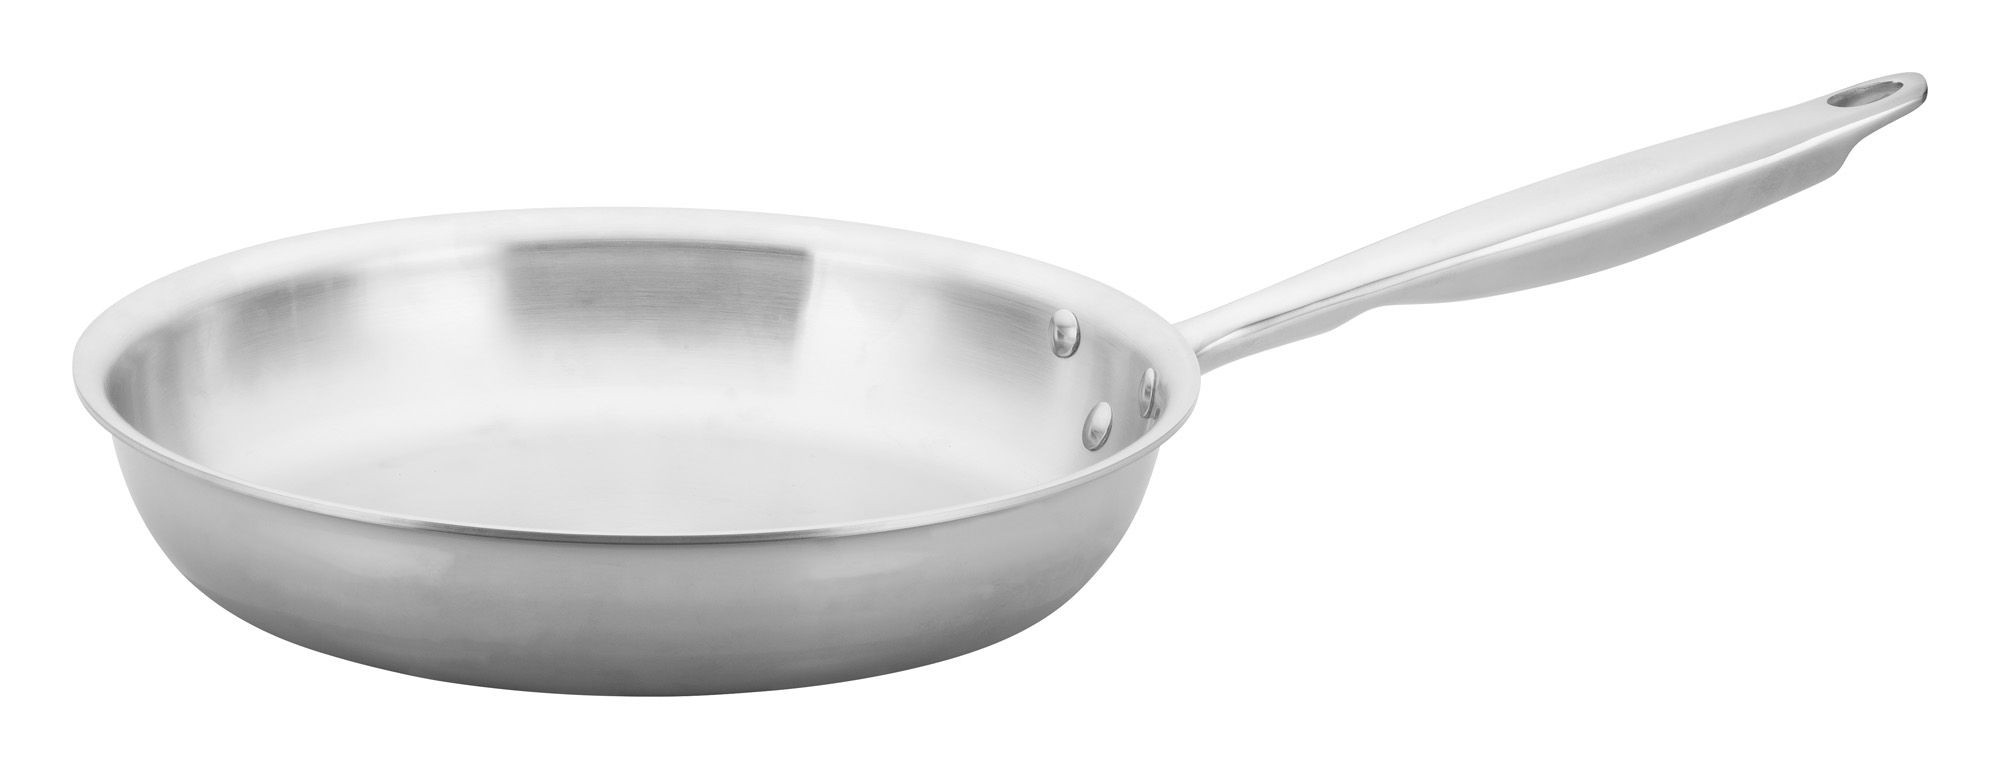 Winco TGFP-10 Tri-Ply Stainless Steel Natural Finish 10" Fry Pan